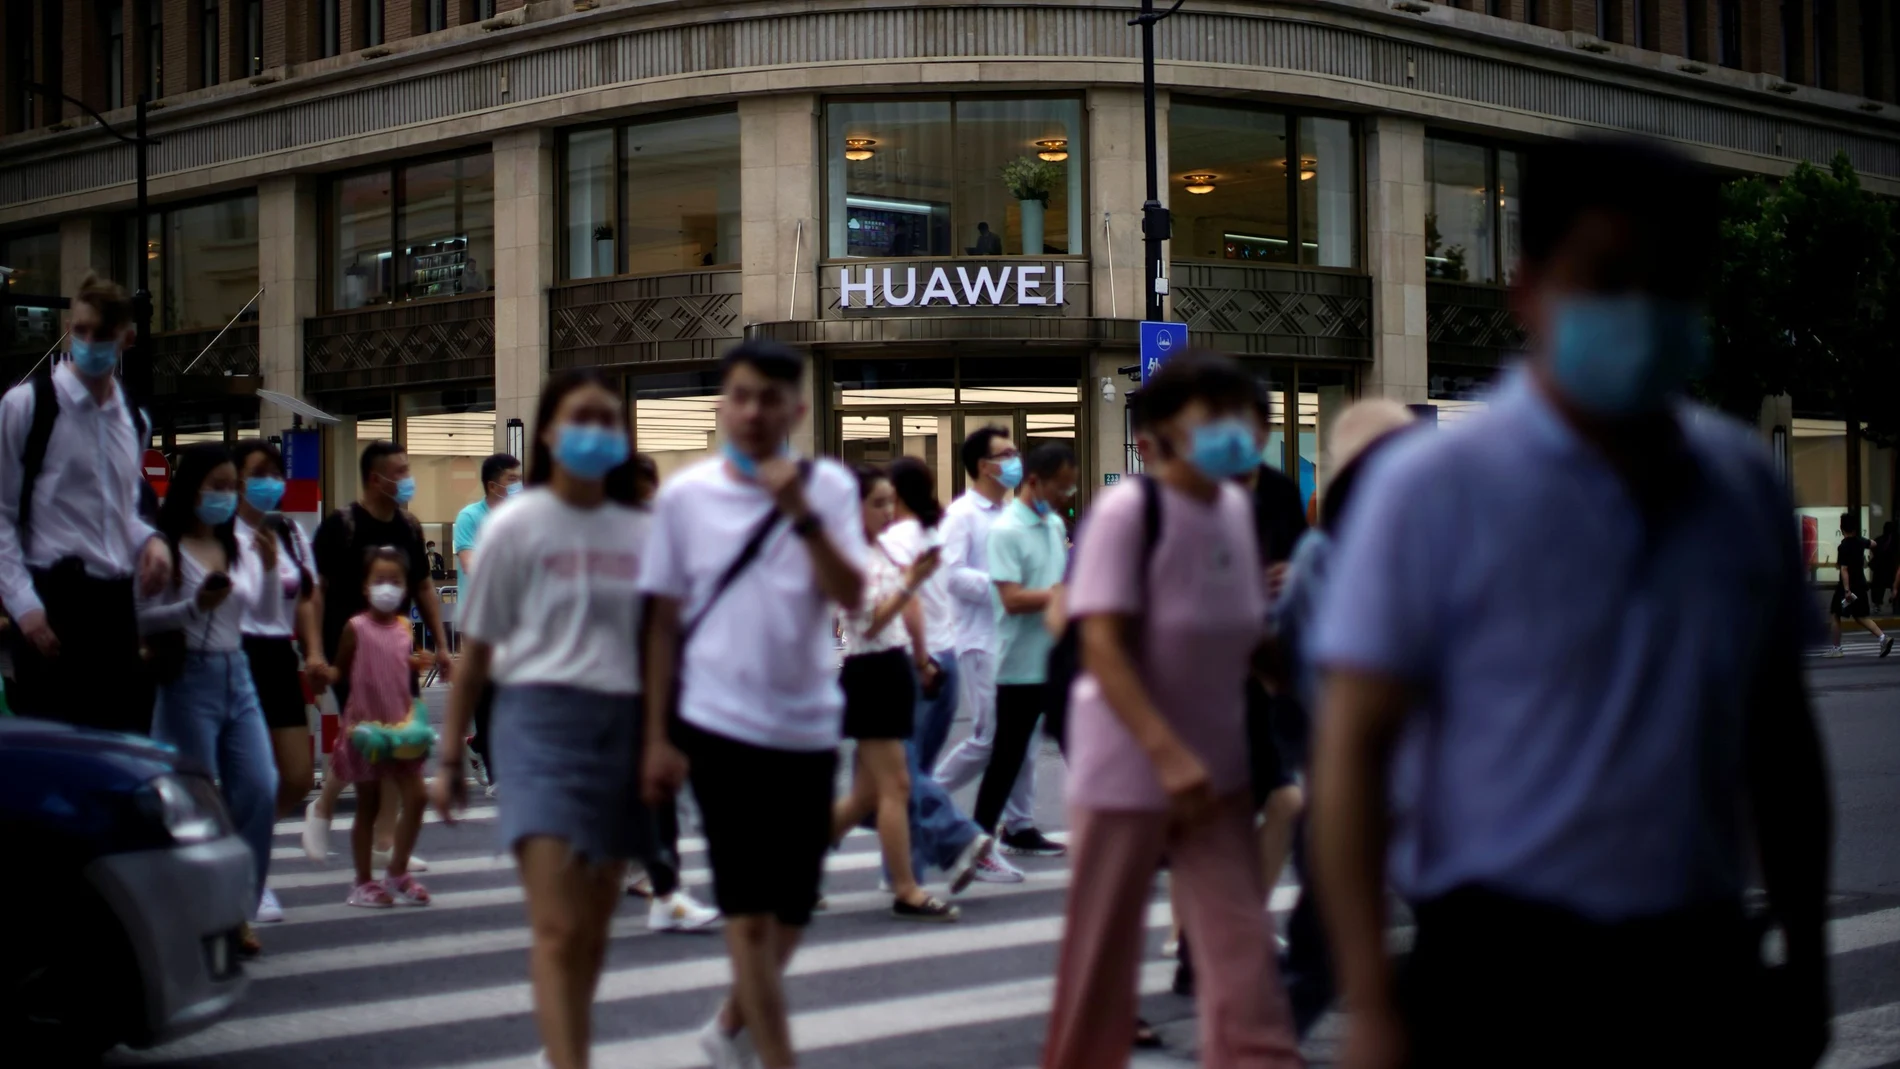 Huawei's new flagship store is seen ahead of tomorrow's official opening in Shanghai